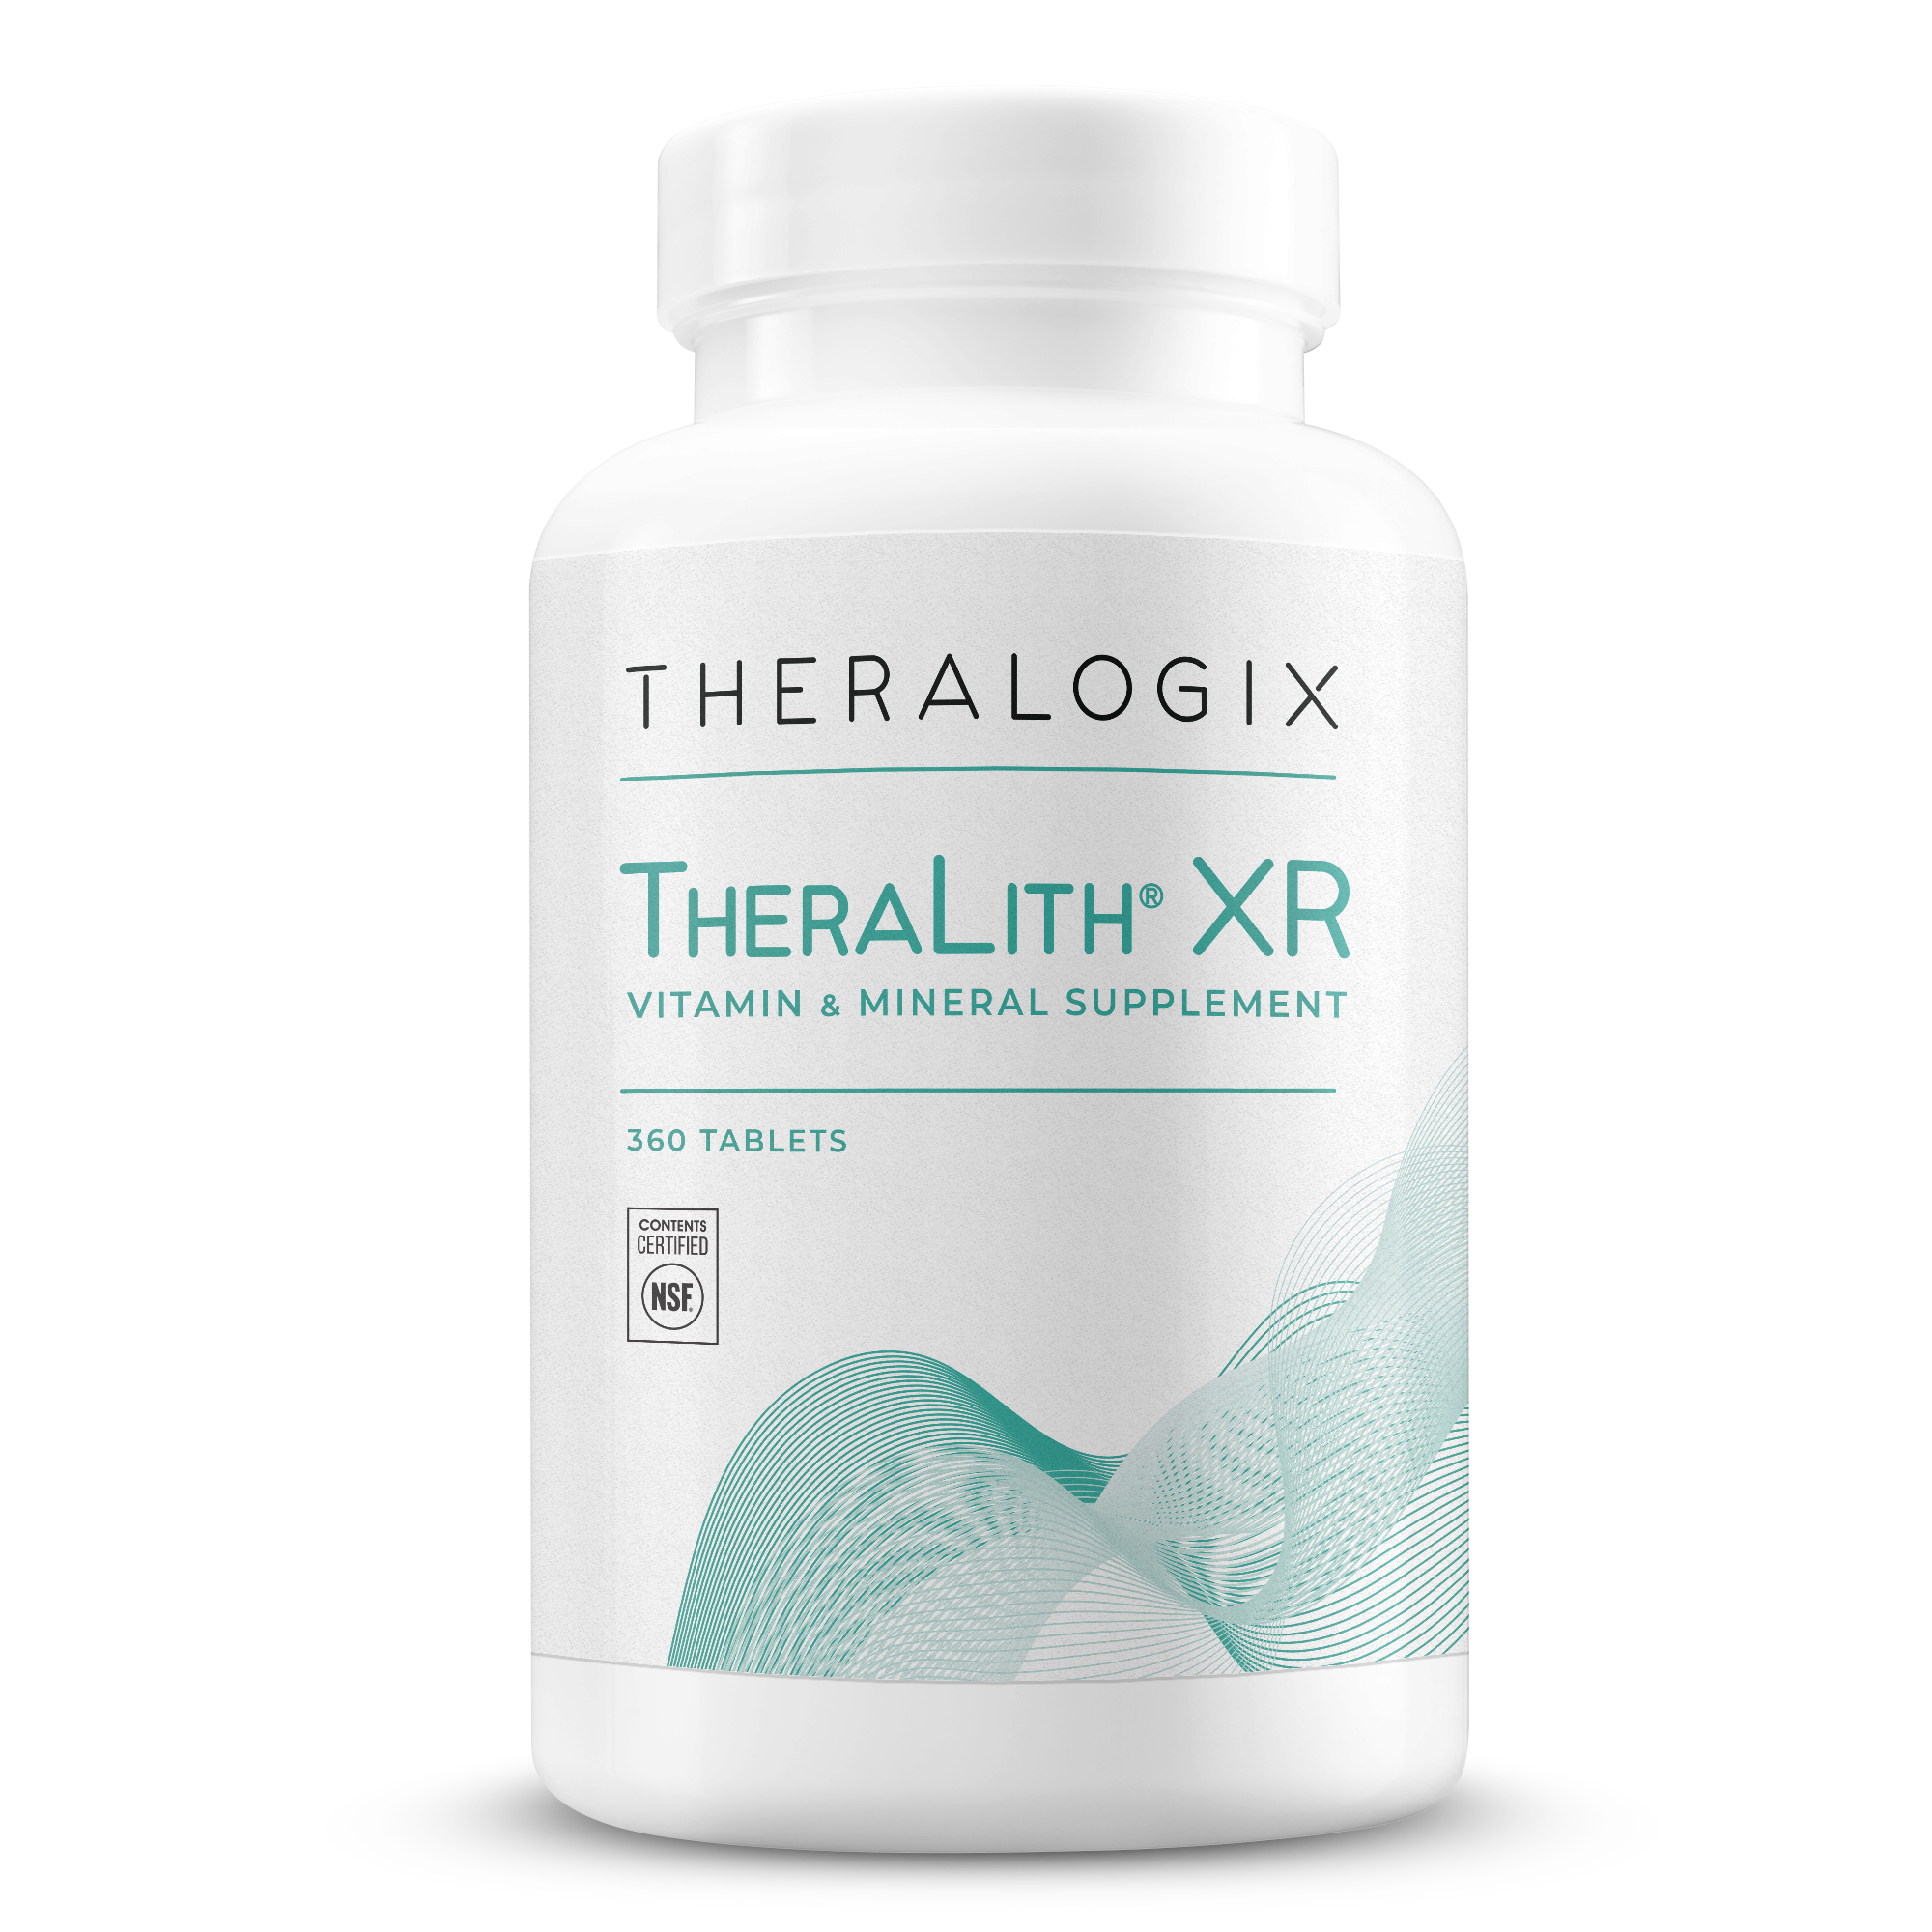 TheraLith® XR Vitamin & Mineral Supplement